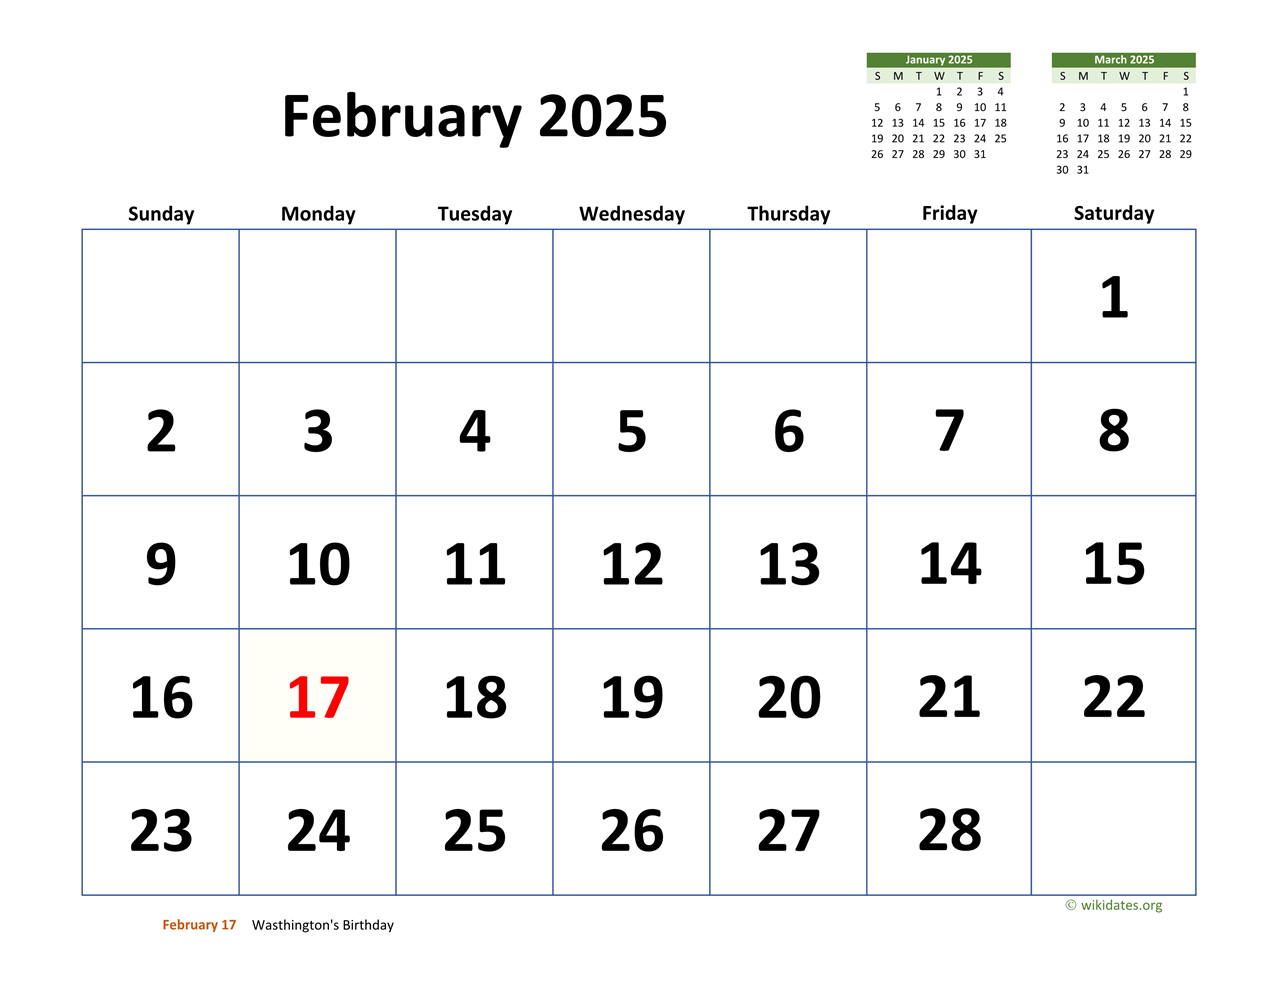 February 2025 Calendar with Extra-large Dates  WikiDates.org